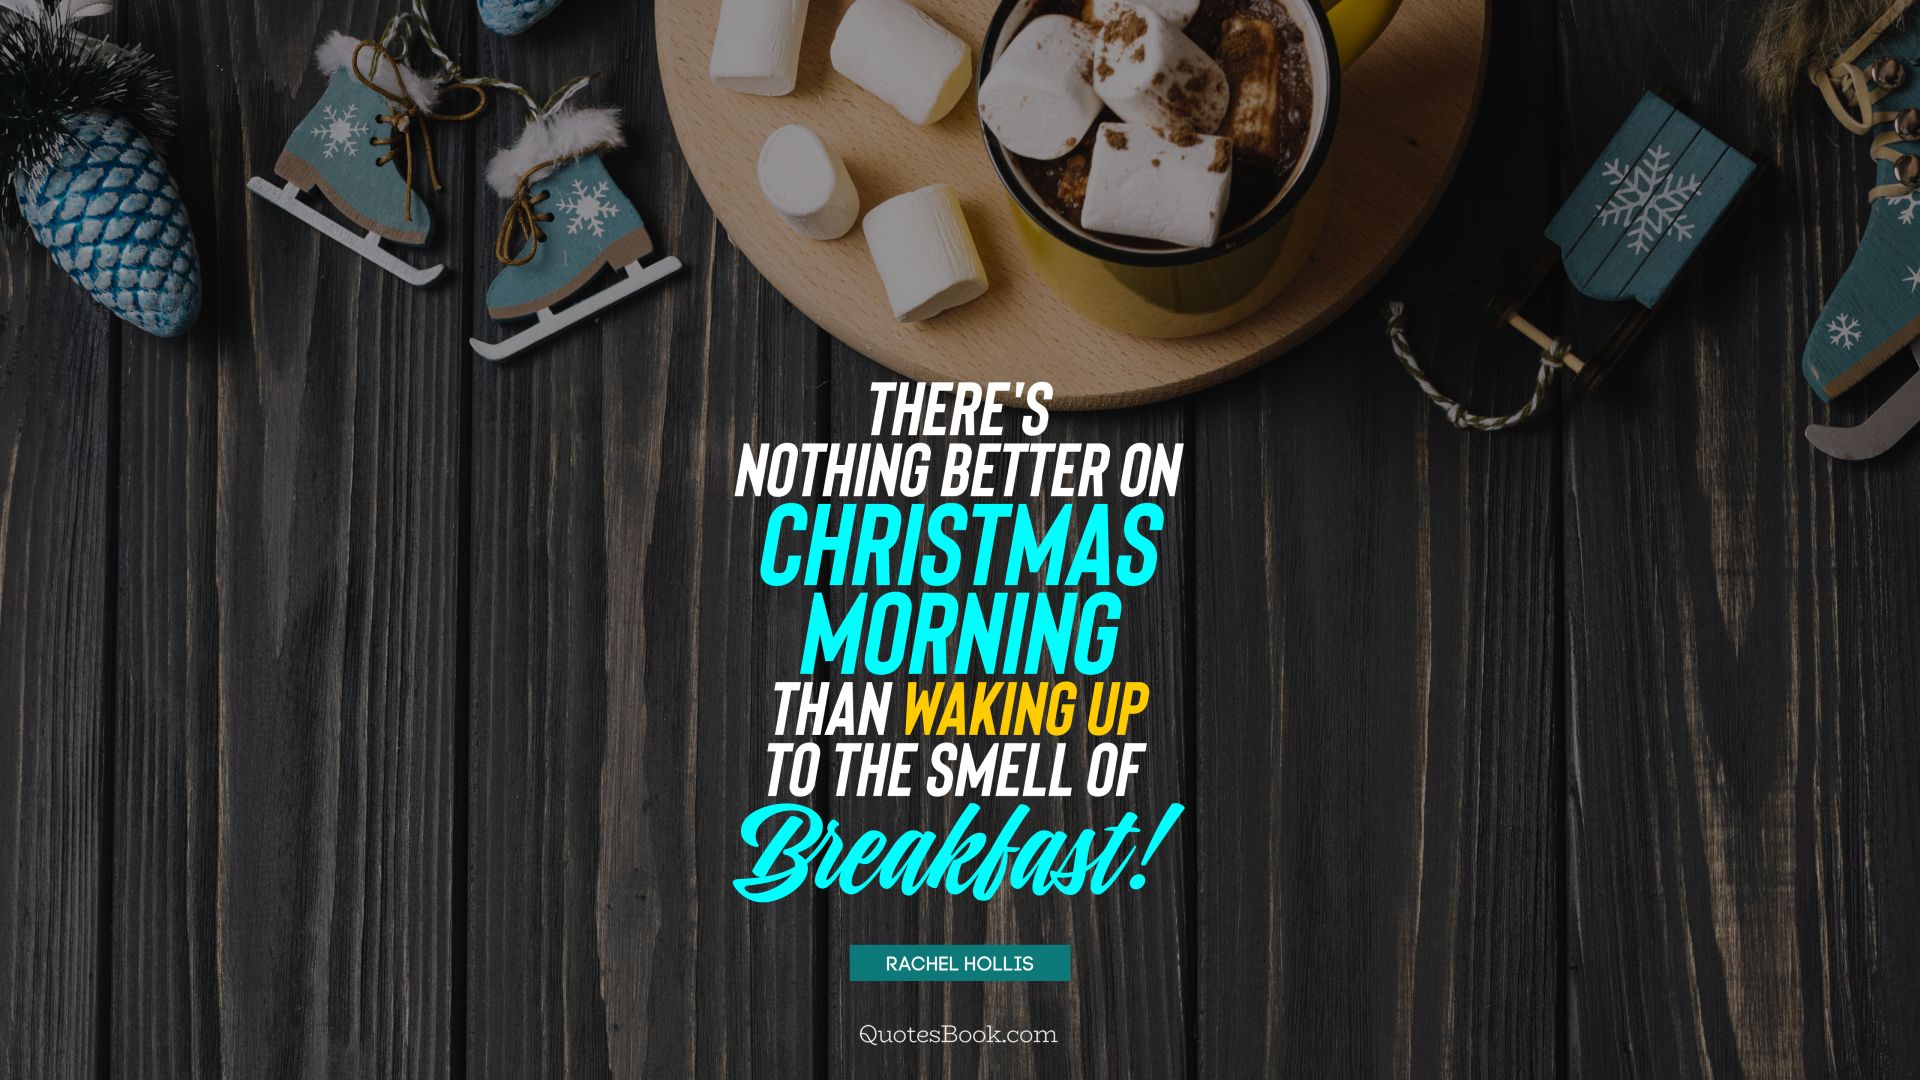 There's nothing better on Christmas morning than waking up to the smell of breakfast! . - Quote by Rachel Hollis